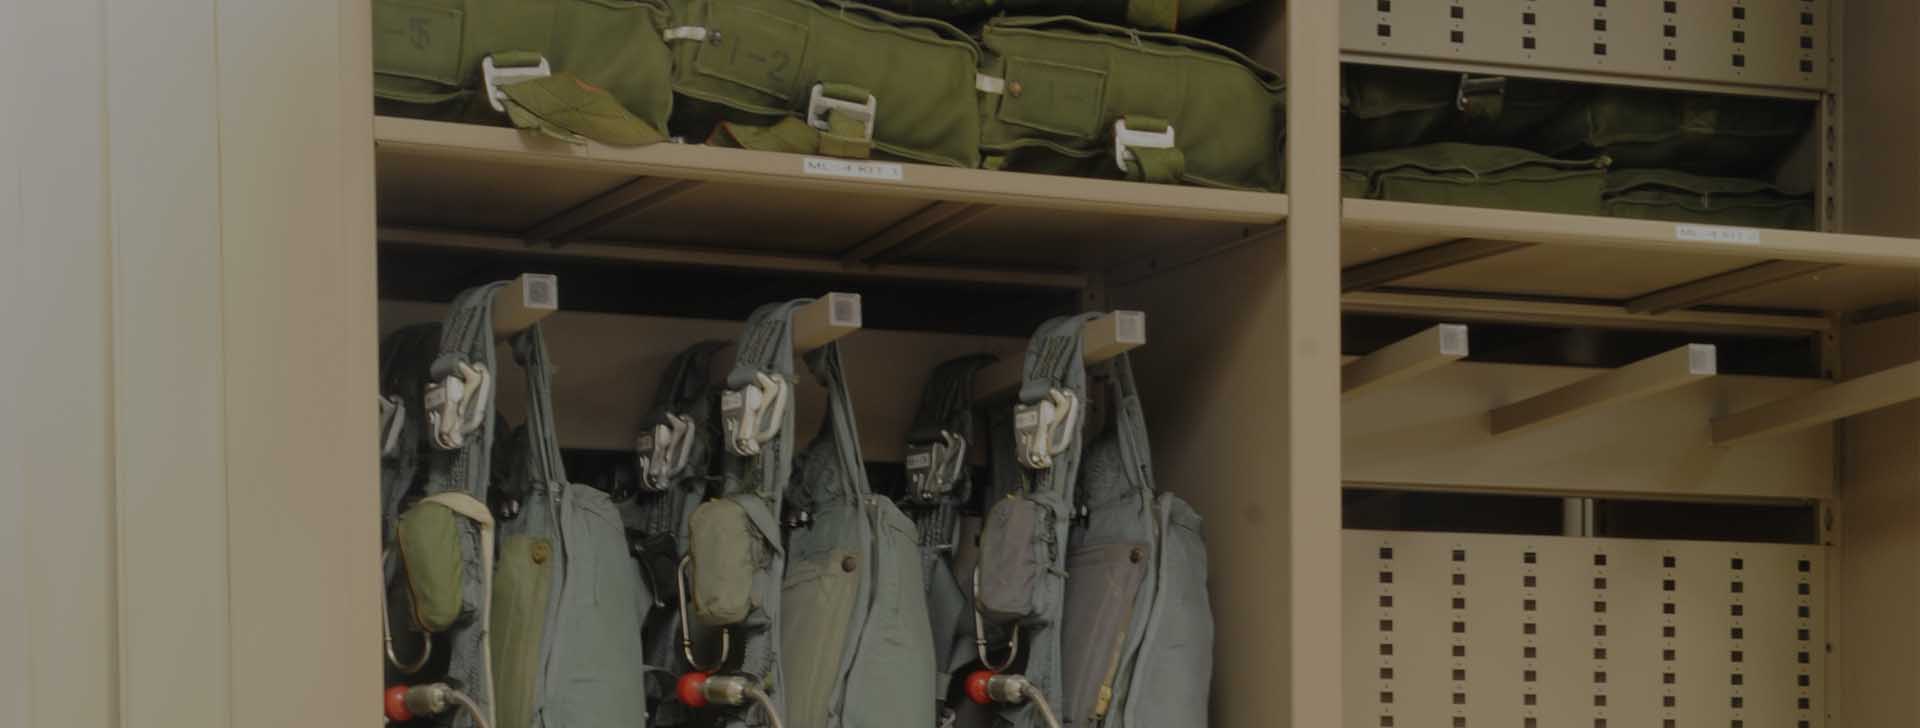 military storage systems